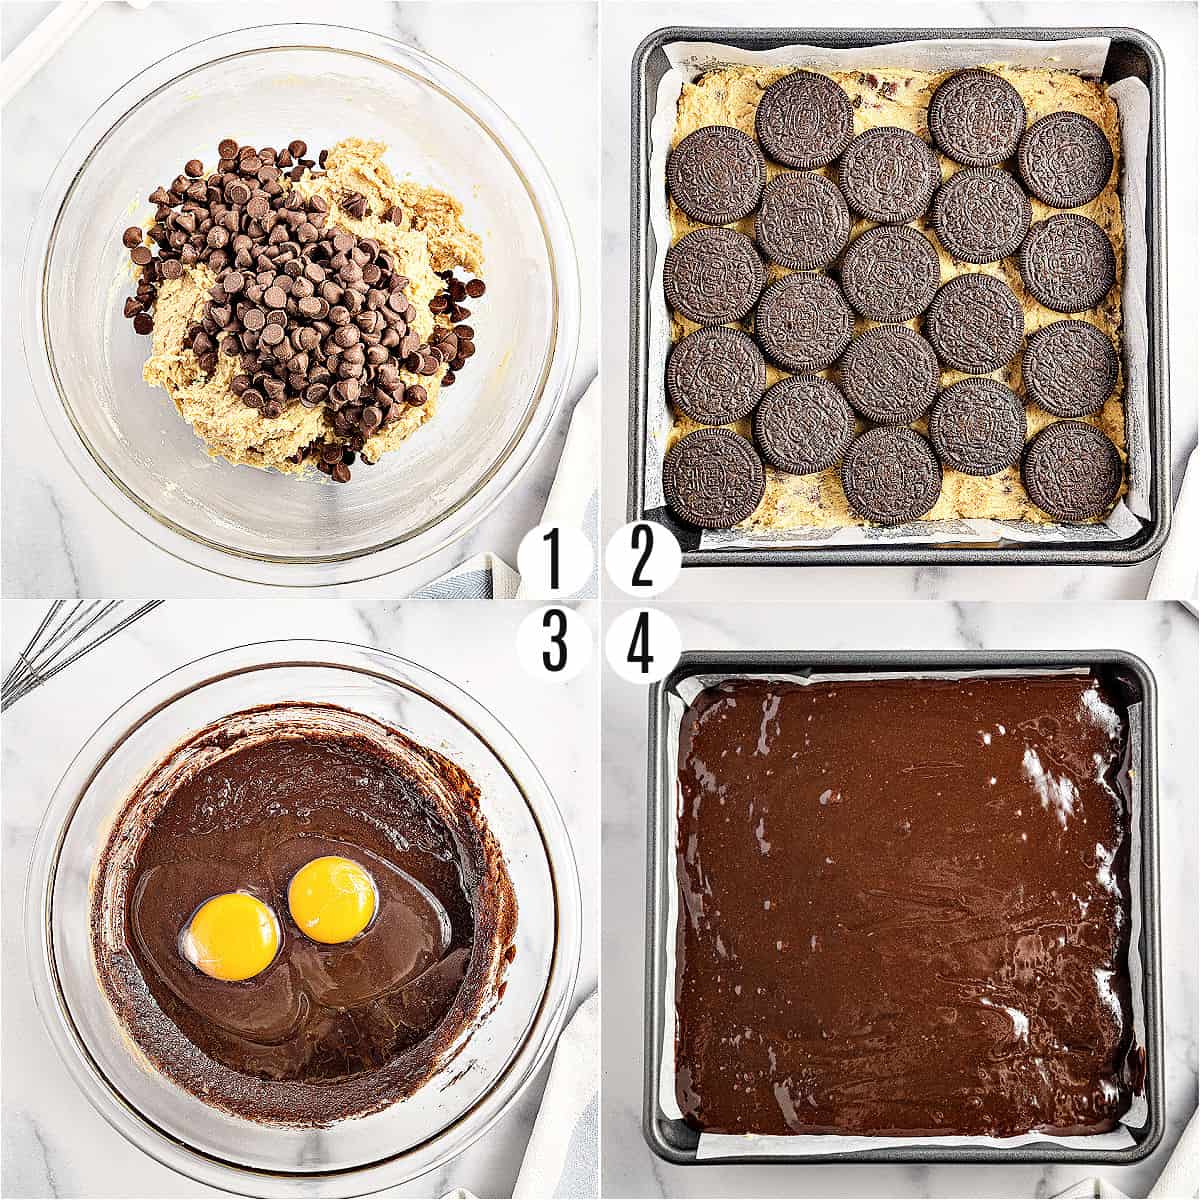 Step by step photos showing how to make slutty brownies.